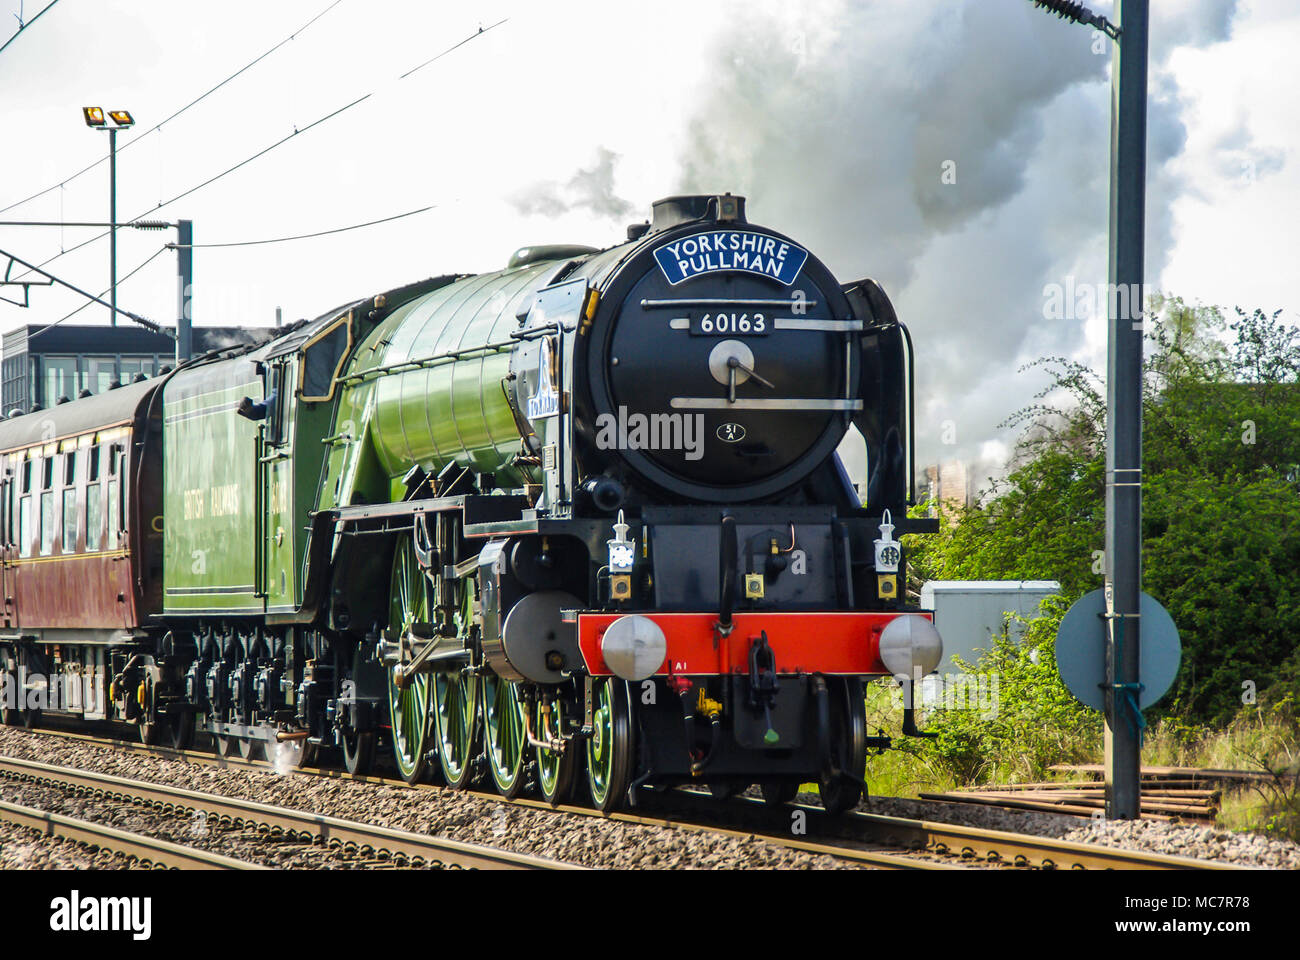 60163 Tornado new built steam locomotive pulling Yorkshire Pullman to York. Completed in 2008 it often runs on UK mainline rails. Space for copy Stock Photo